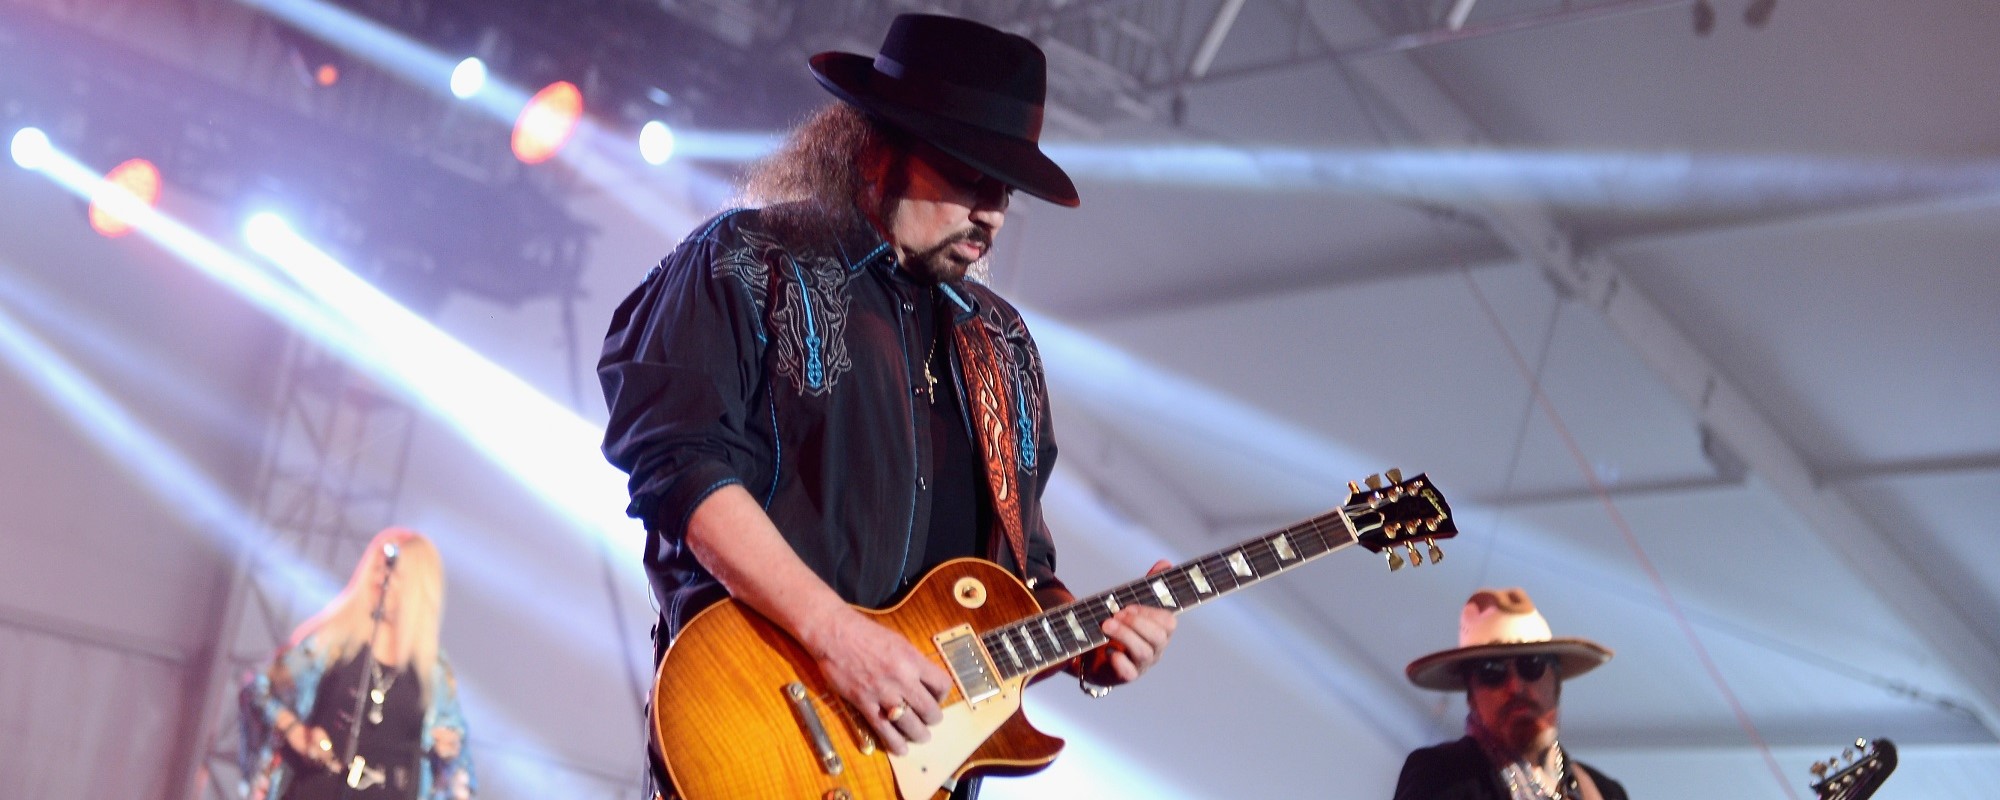 Lynyrd Skynyrd Pays Tribute to Gary Rossington on First Anniversary of His Death: “We Know You Are Smiling Down”